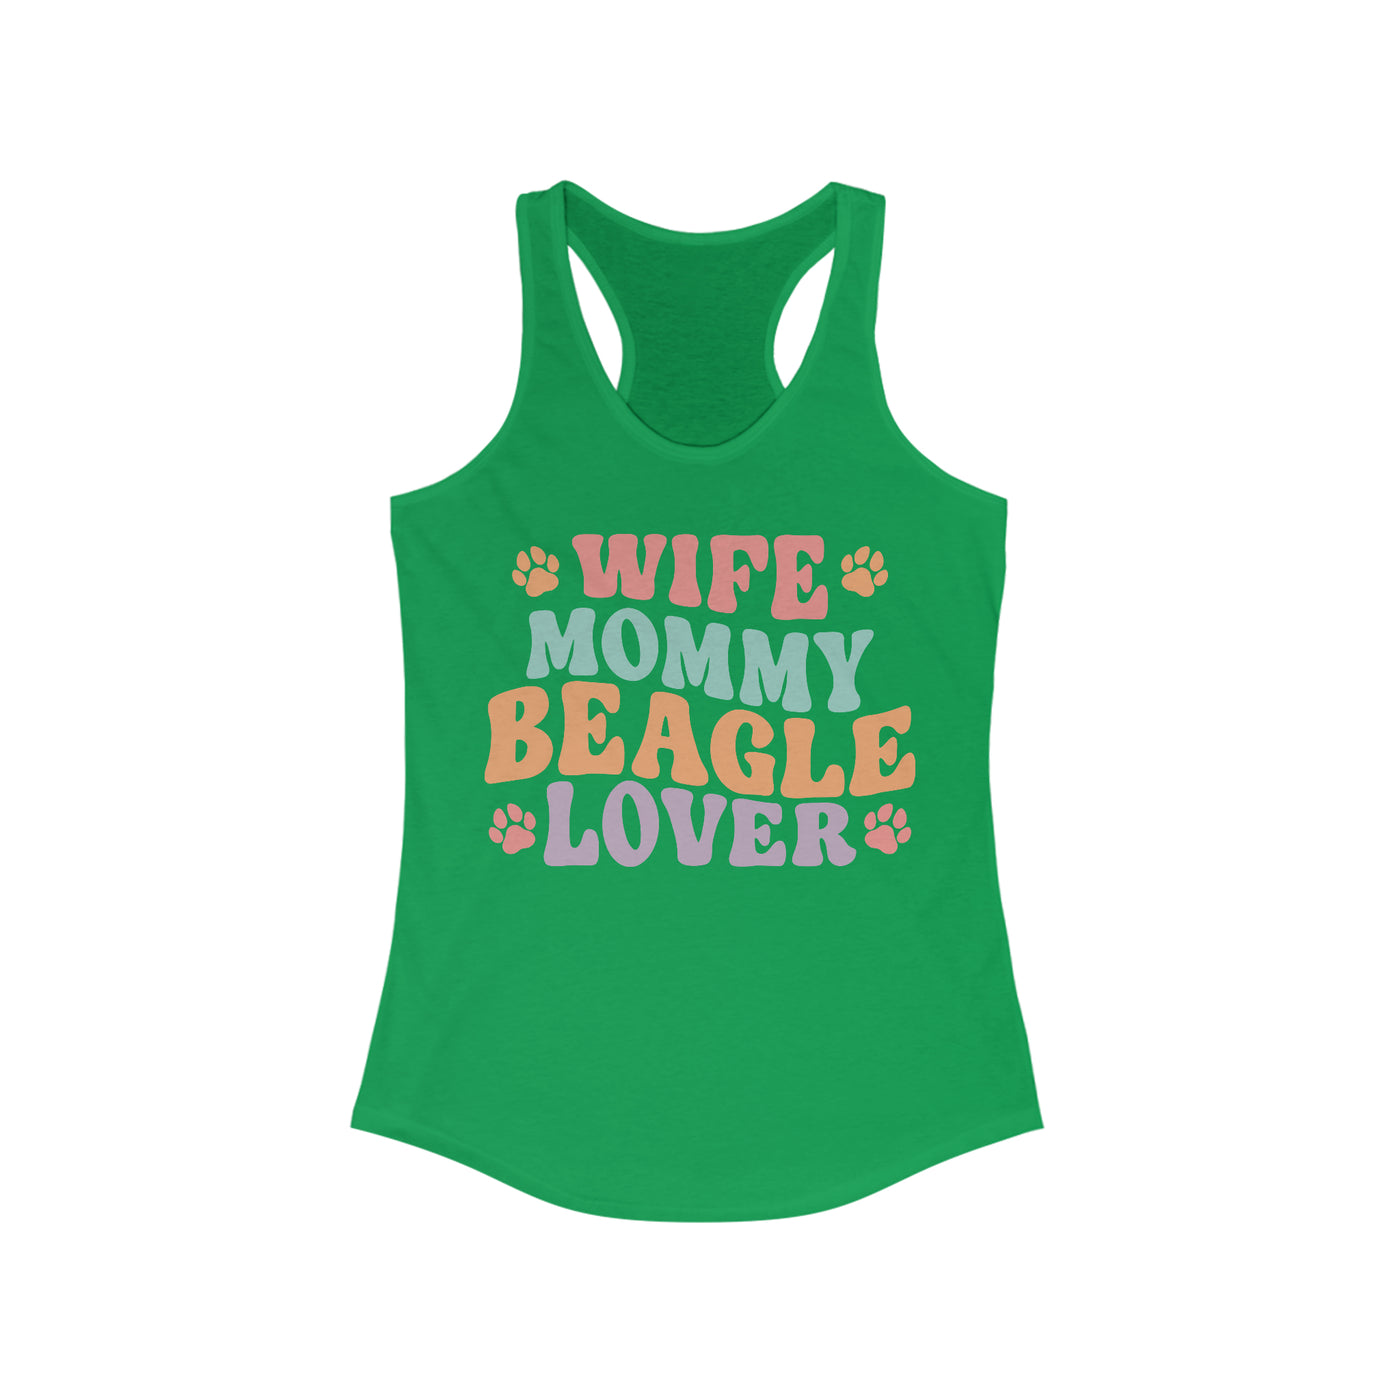 Wife Mommy Beagle Lover Tank Top